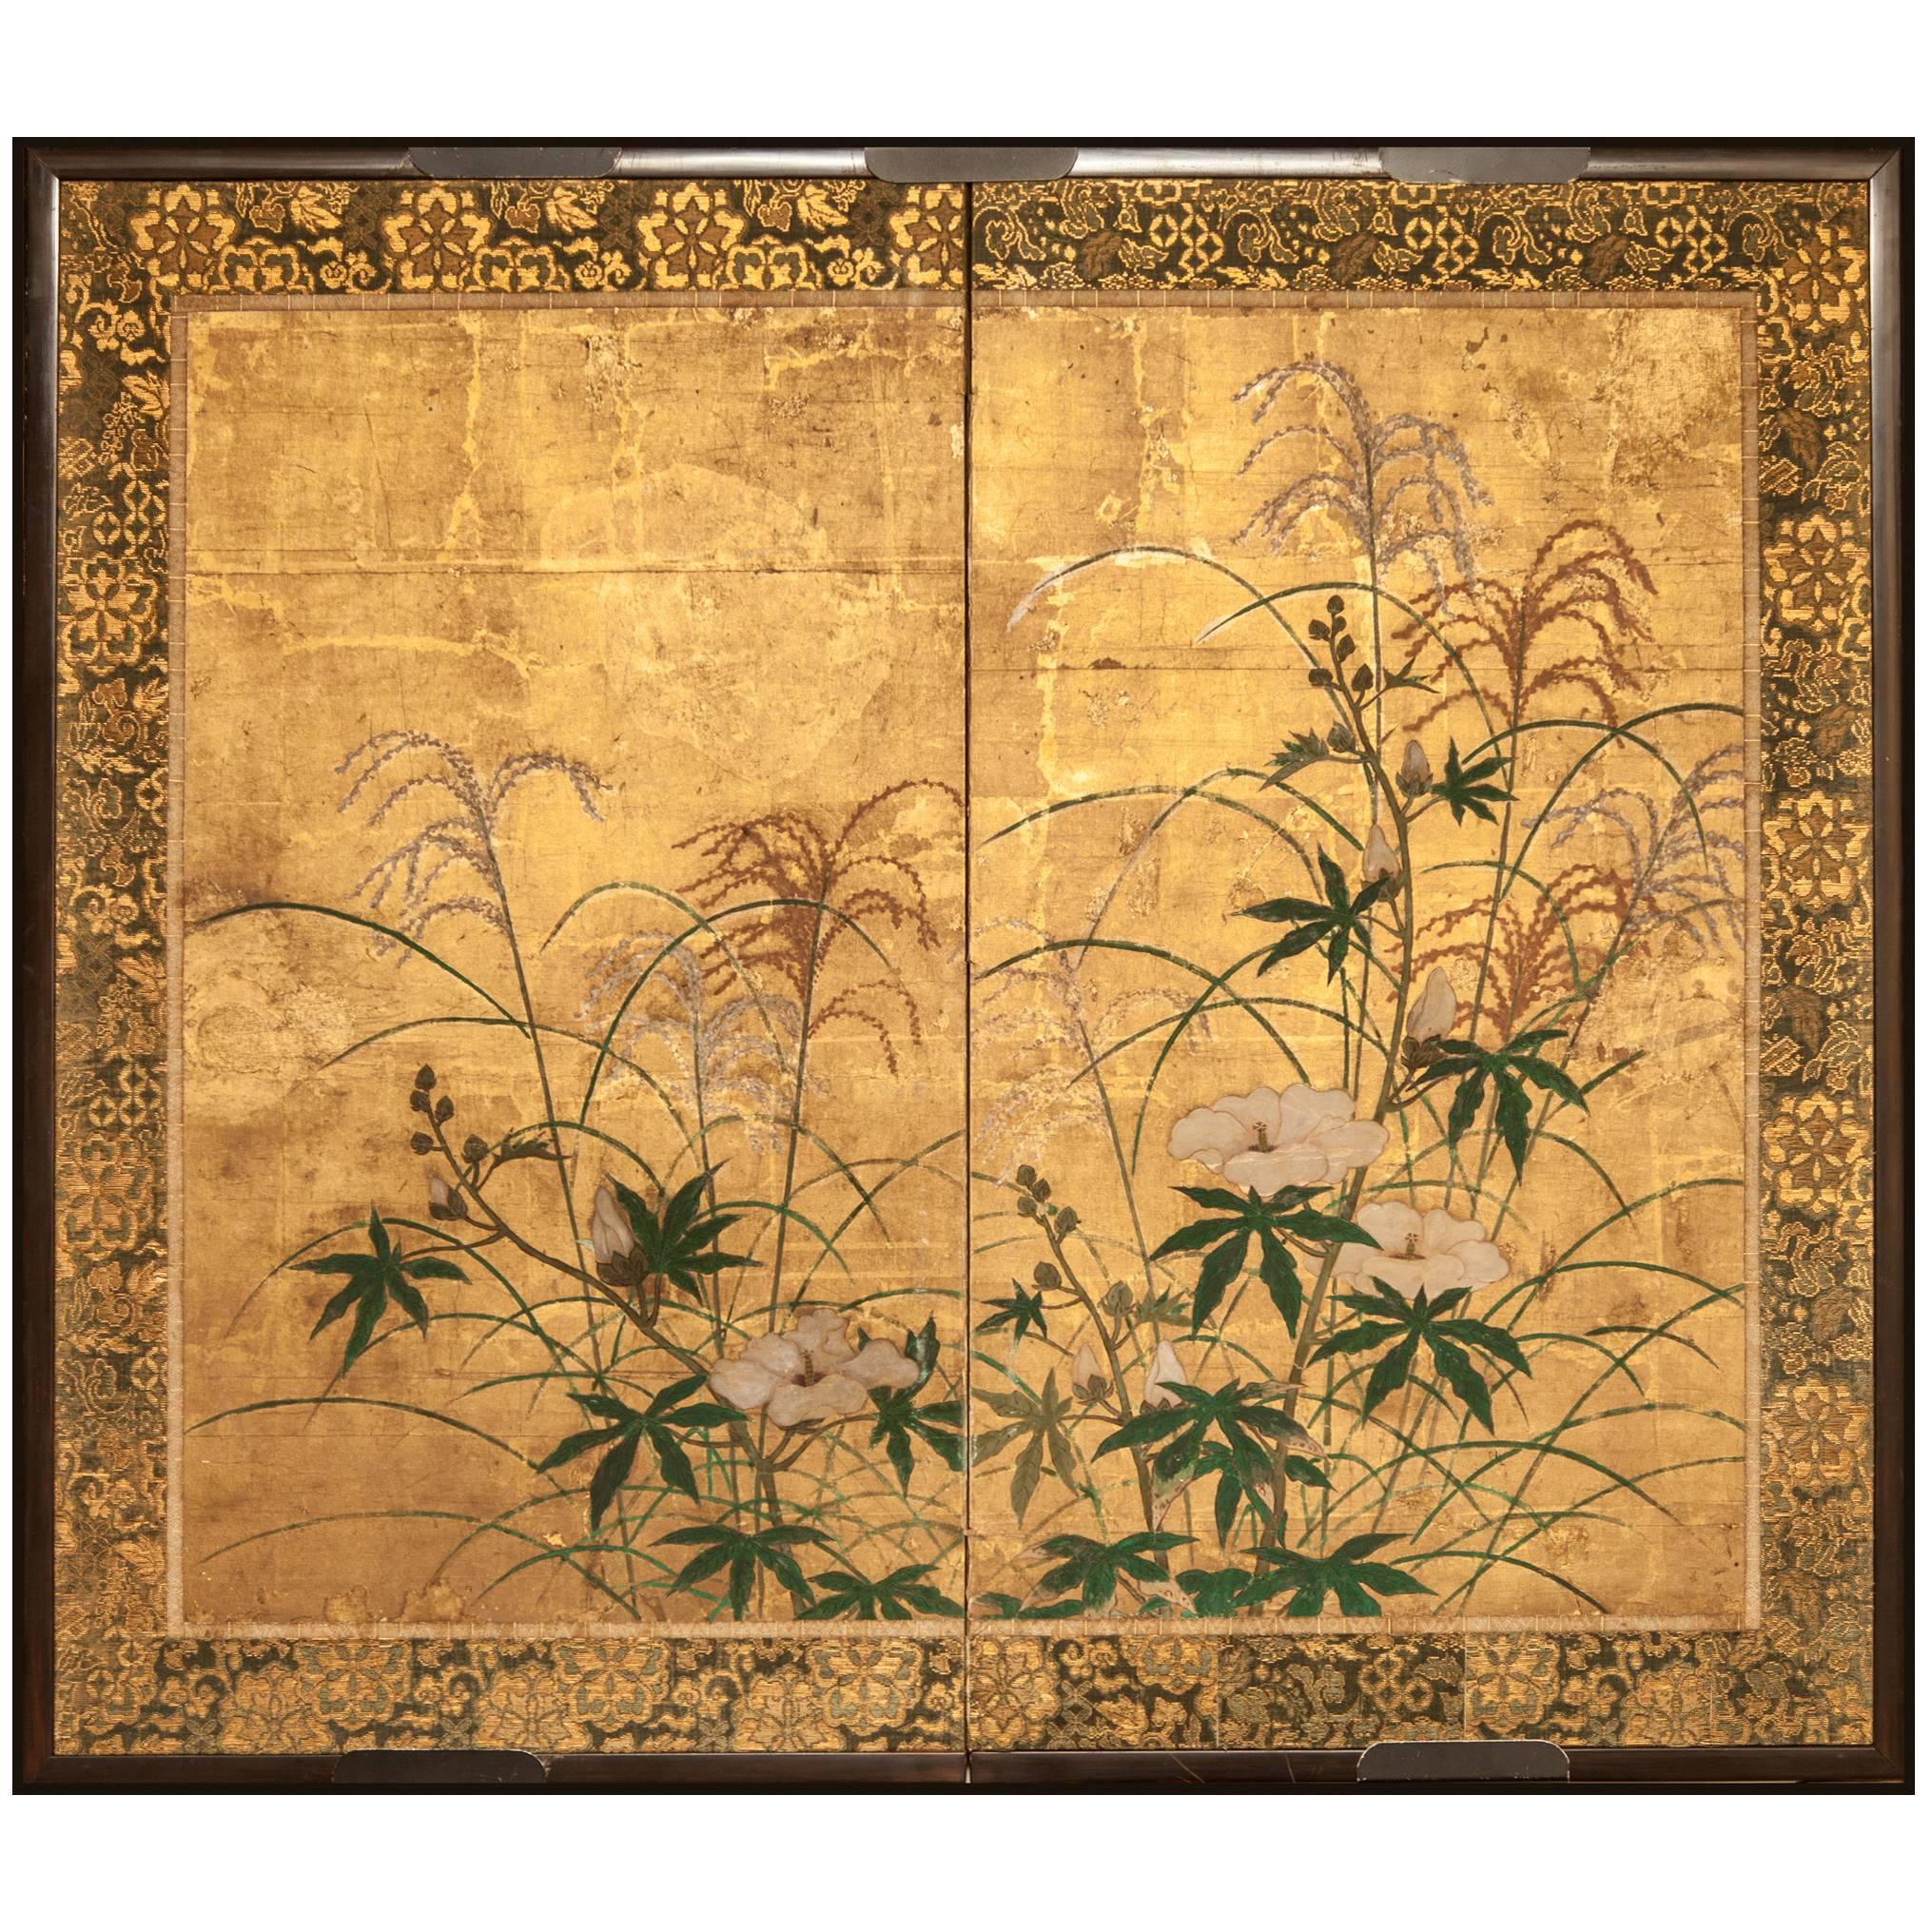 Japanese Screen "Flowers and Grasses on Gold"